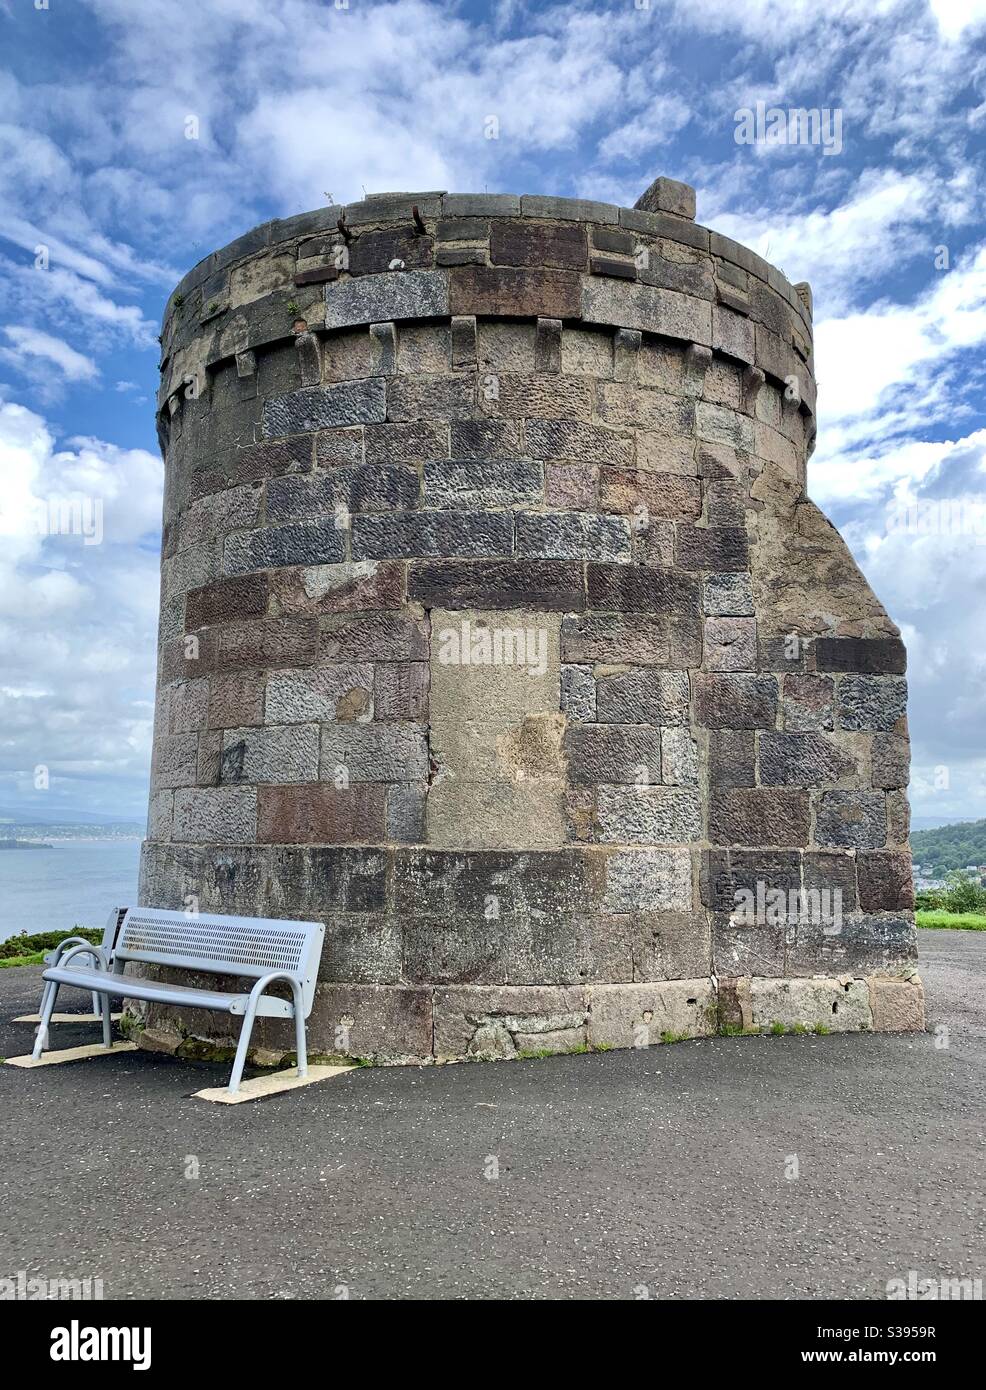 The Tower on Tower Hill, Gourock Stock Photo